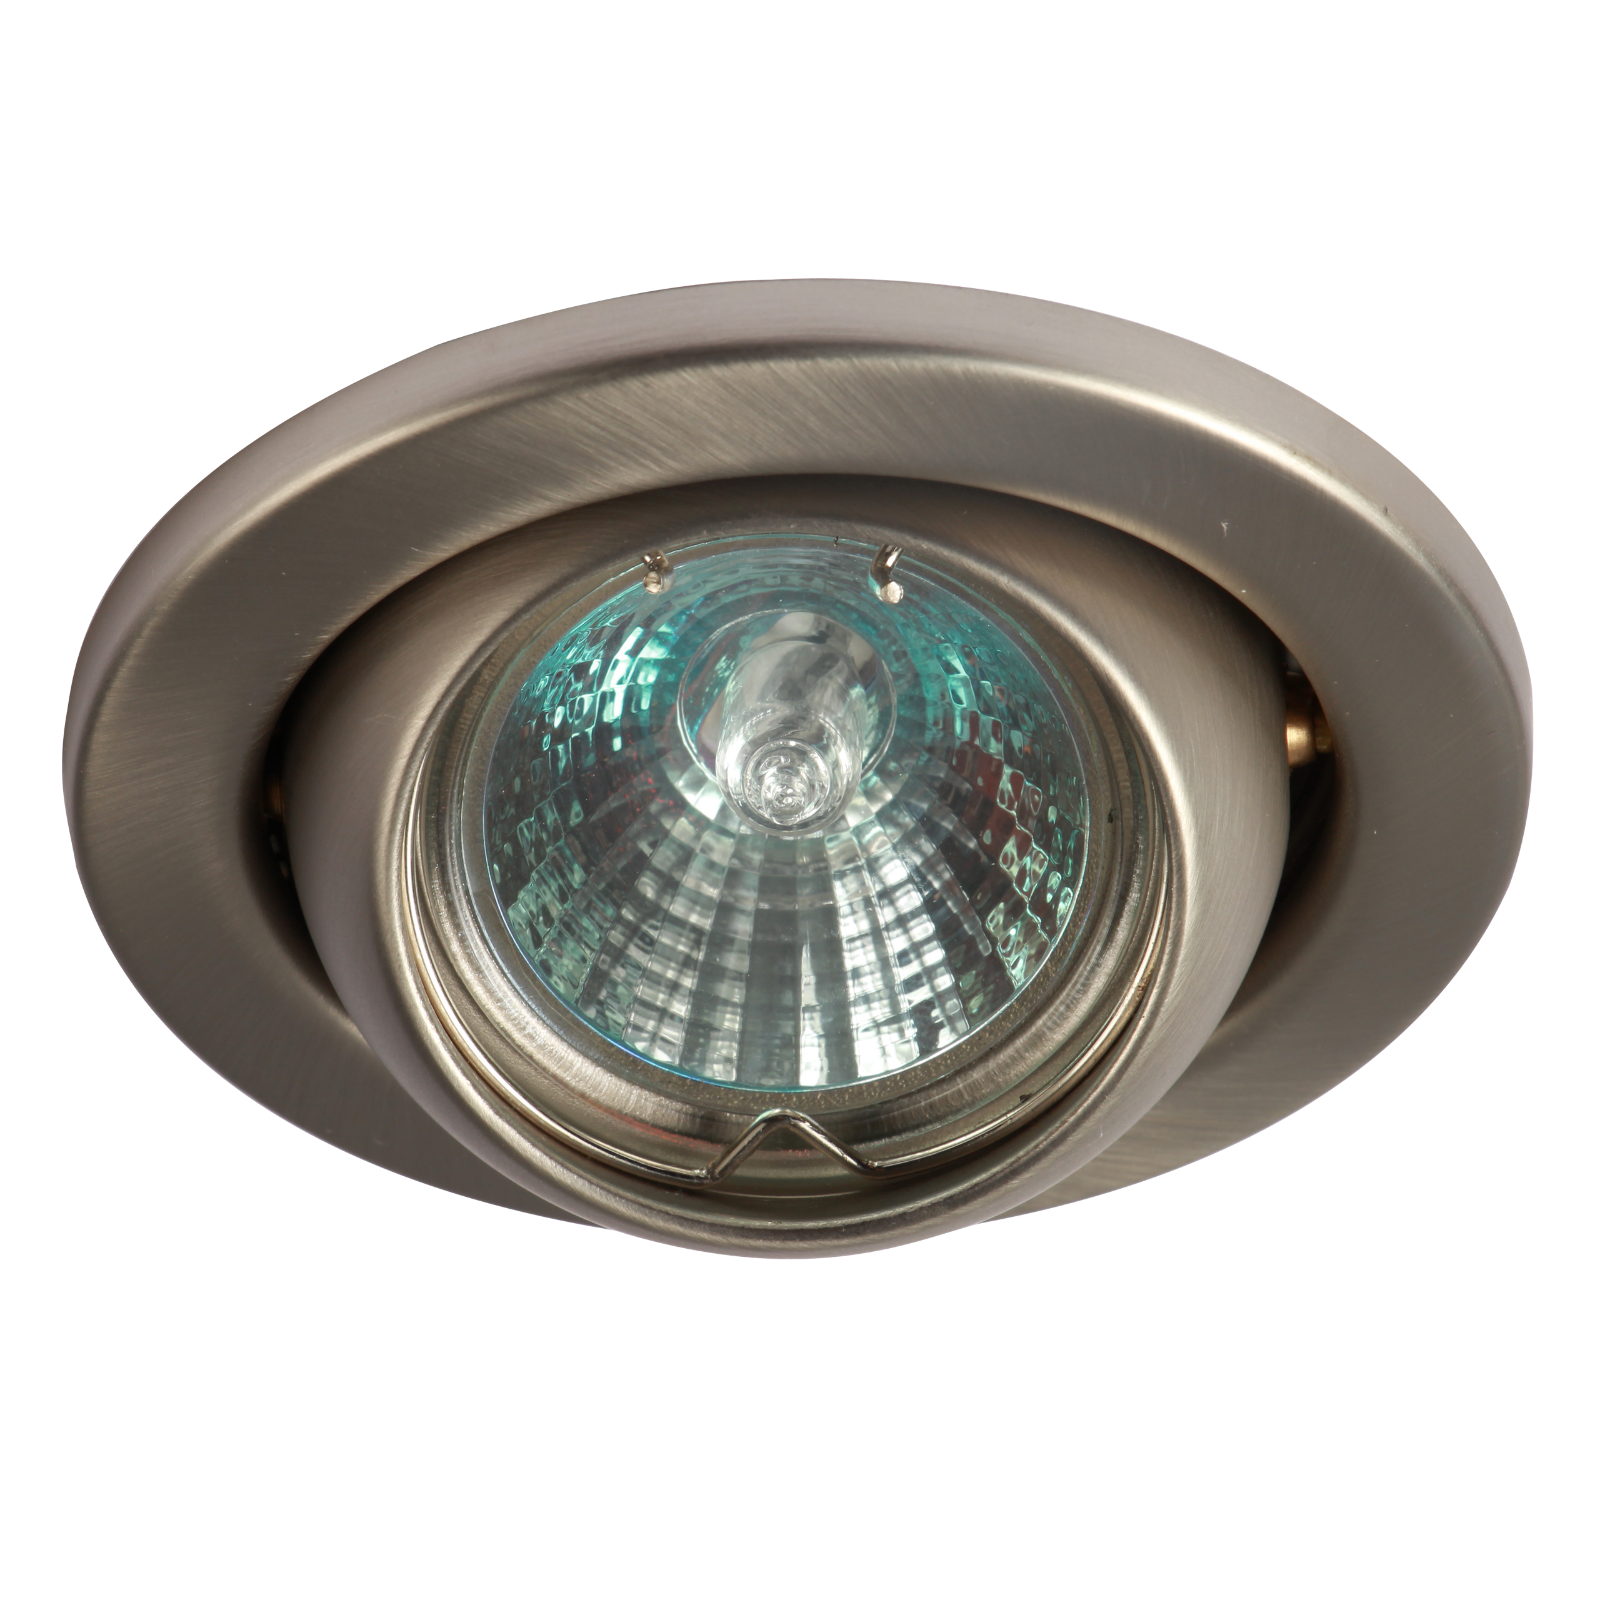 IP20 12V 50W Max. L/V Brushed Chrome Eyeball Downlight With Bridge - LE04CBR1 - SOLD-OUT!! 